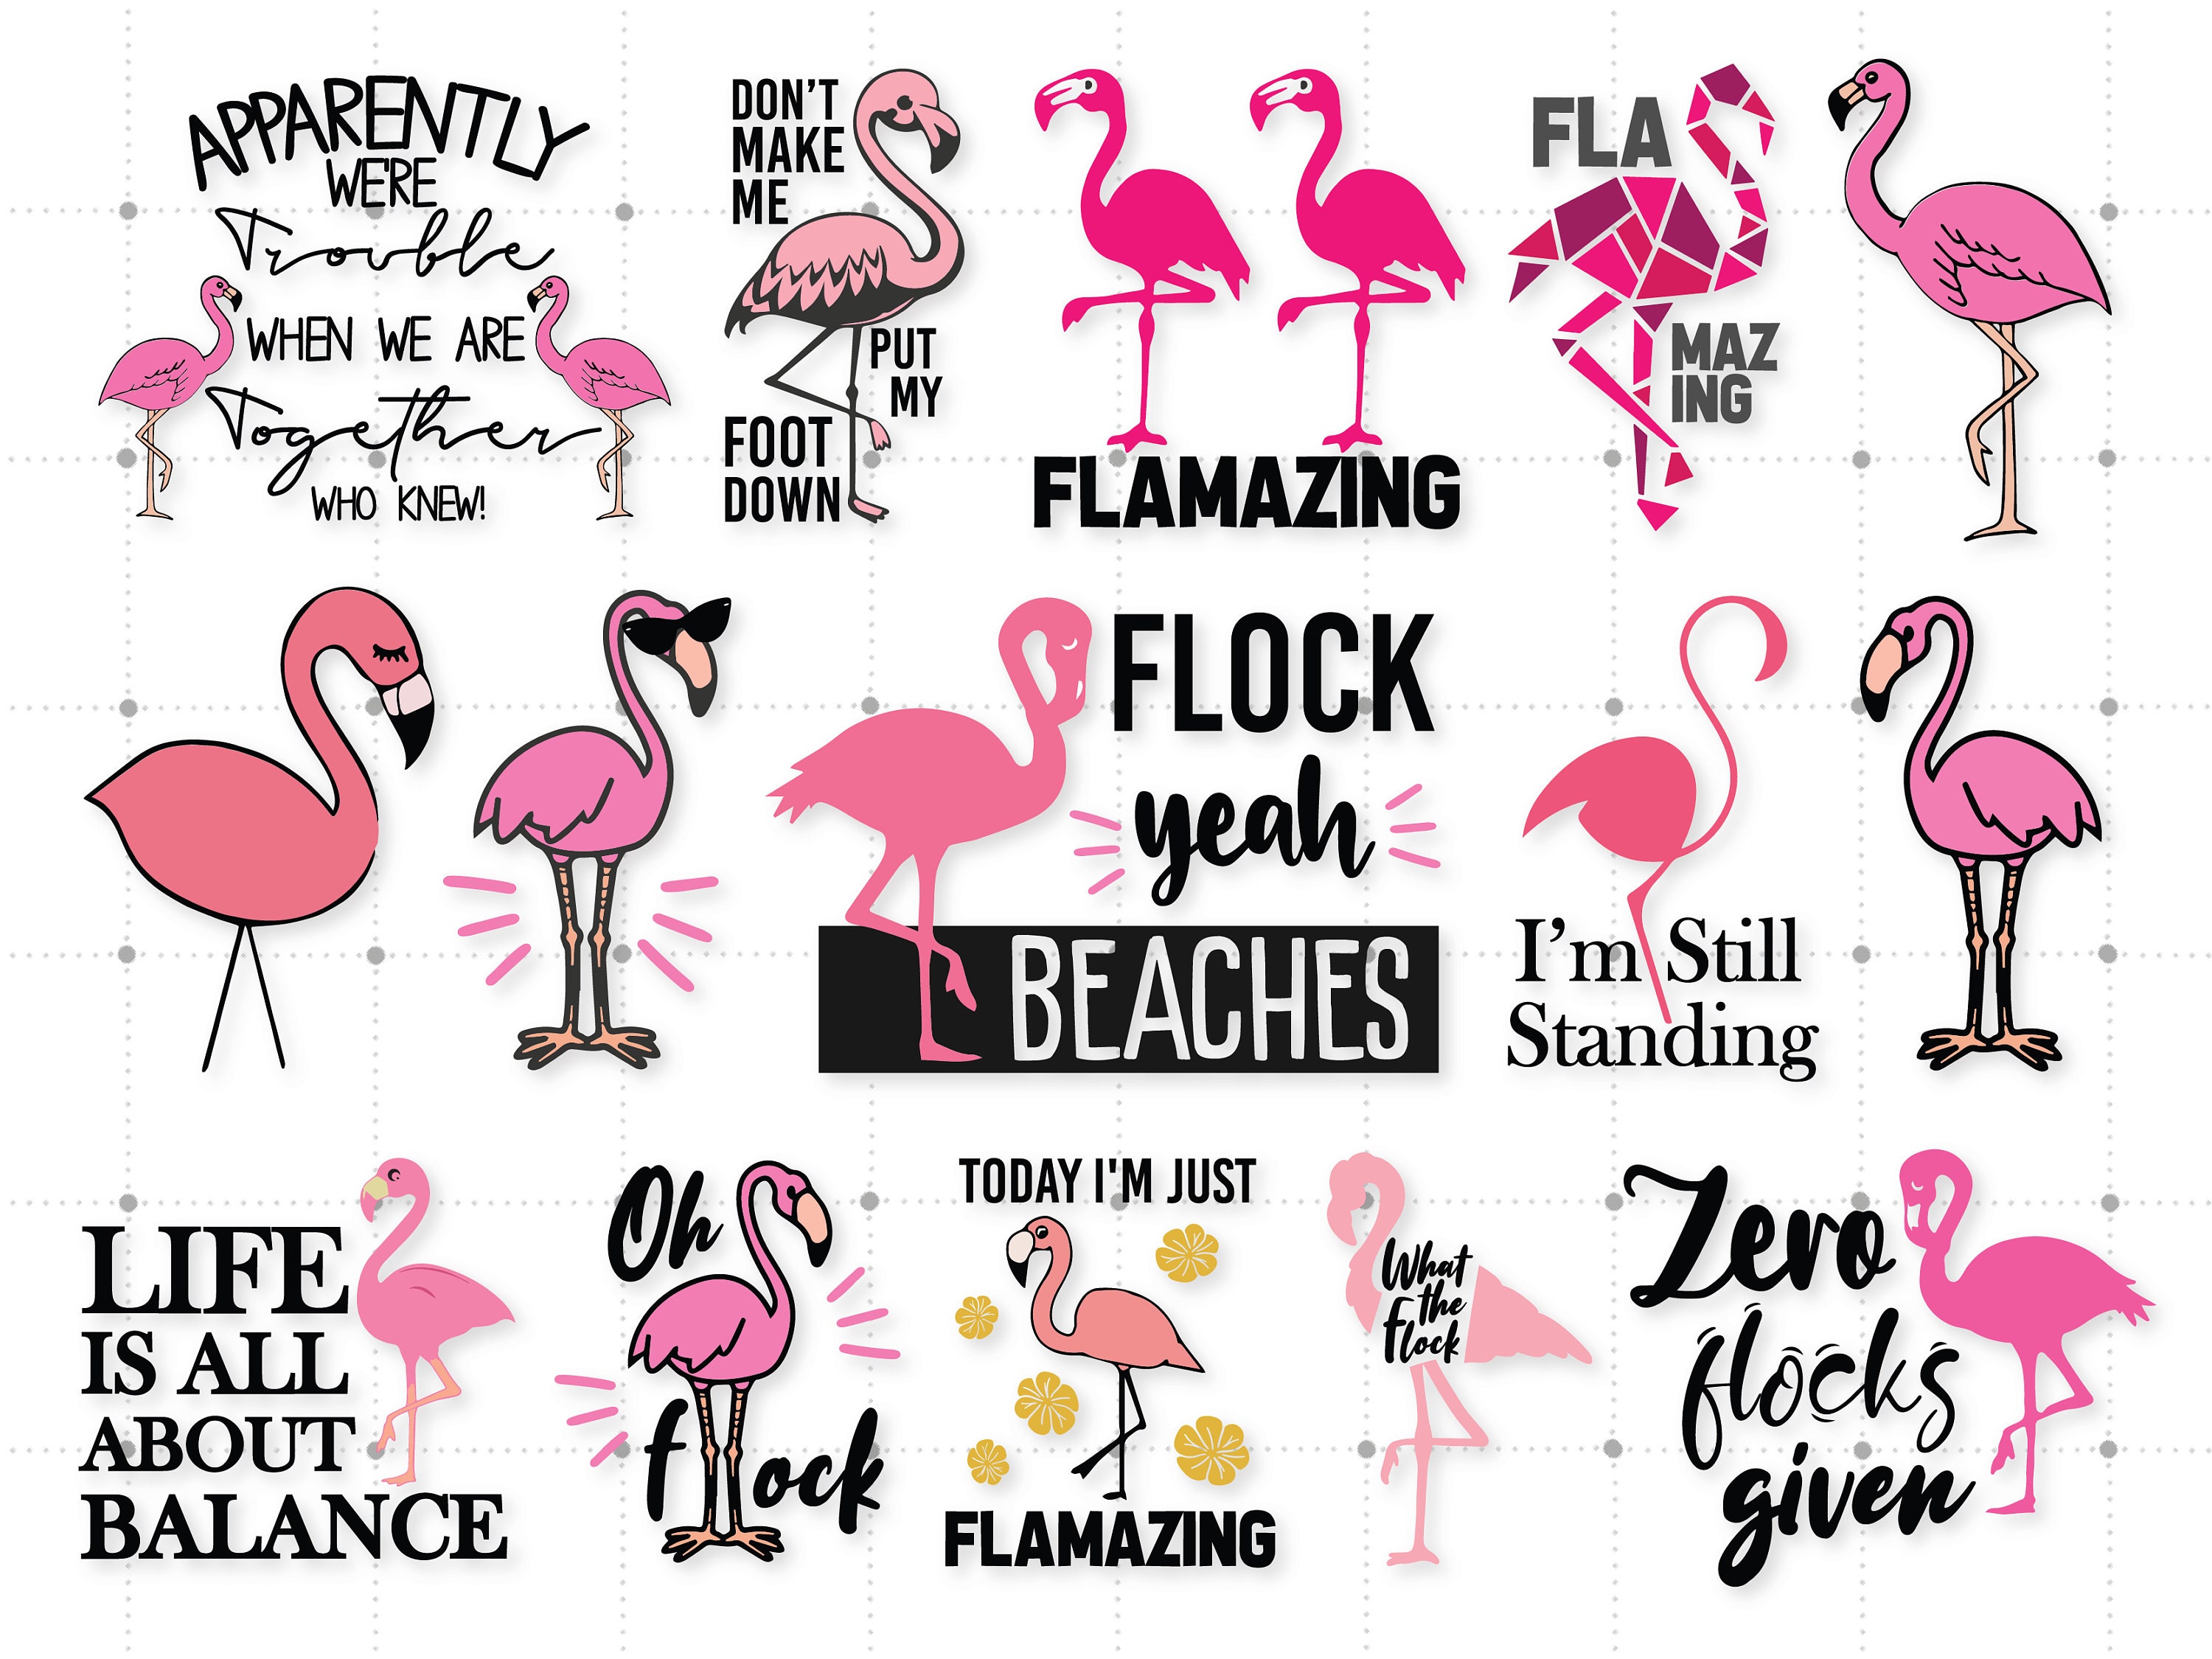 Flamingo Straws - $0.99 : SVGCuts - SVG files for your cutting